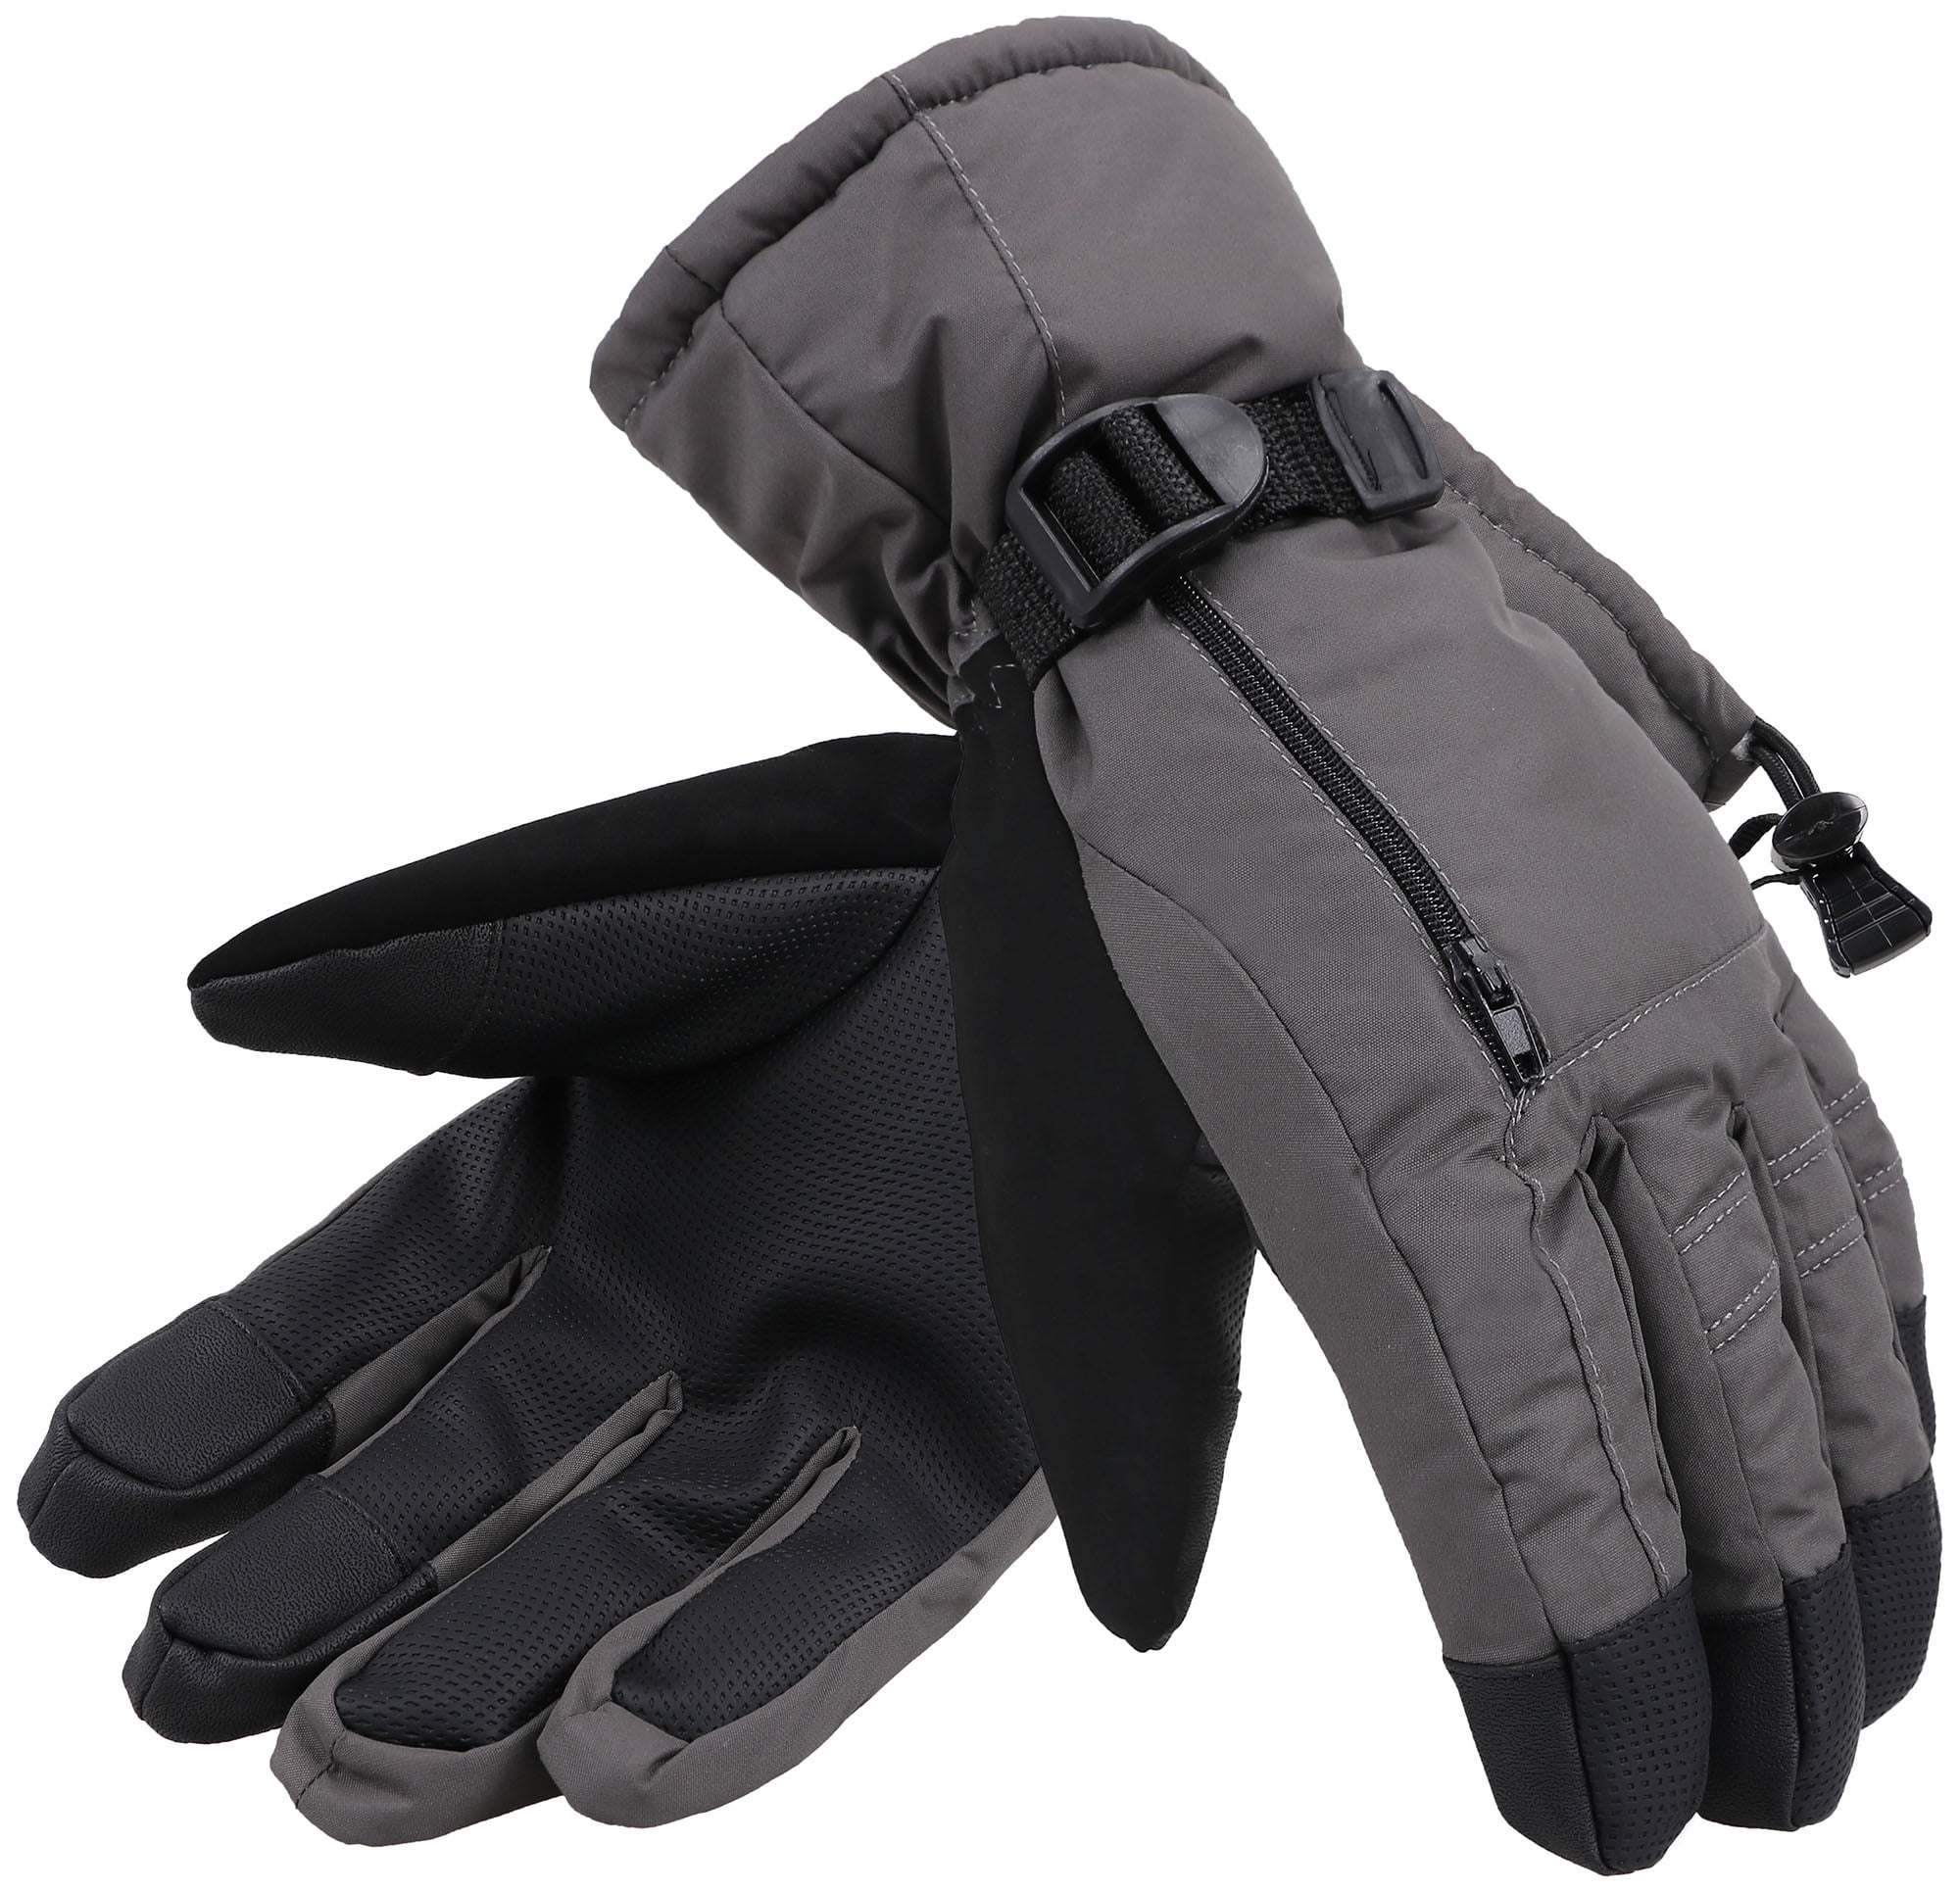 Men Ski Gloves-Waterproof Adult Touchscreen Gloves for Cold Winter Mittens for Skateboarding Warm Snow Gloves with Pocket 